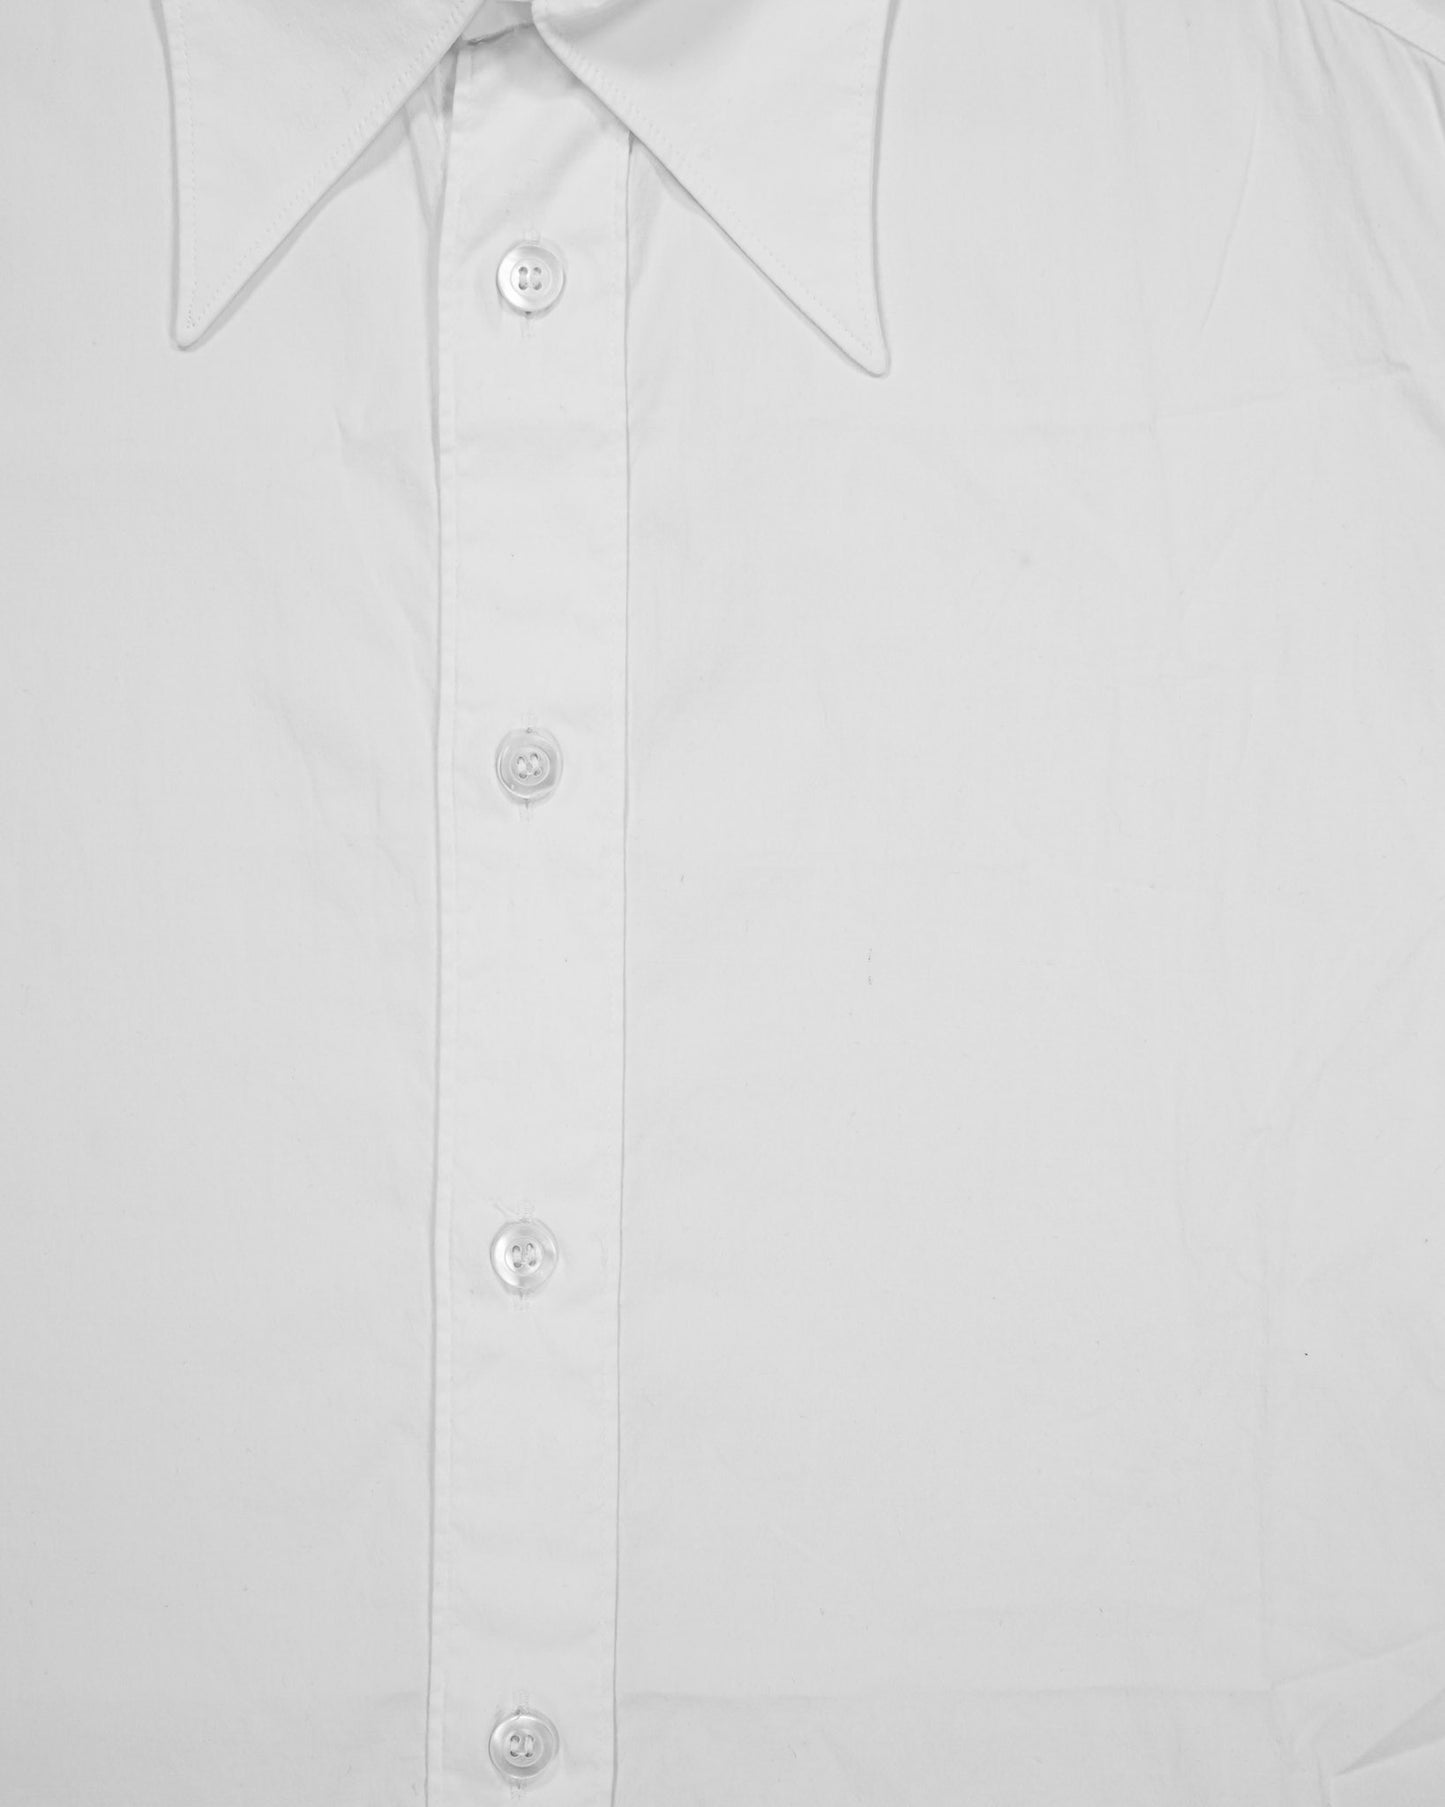 Carol Christian Poell Pointed Collar Button Up Shirt - AW95 "Protective"